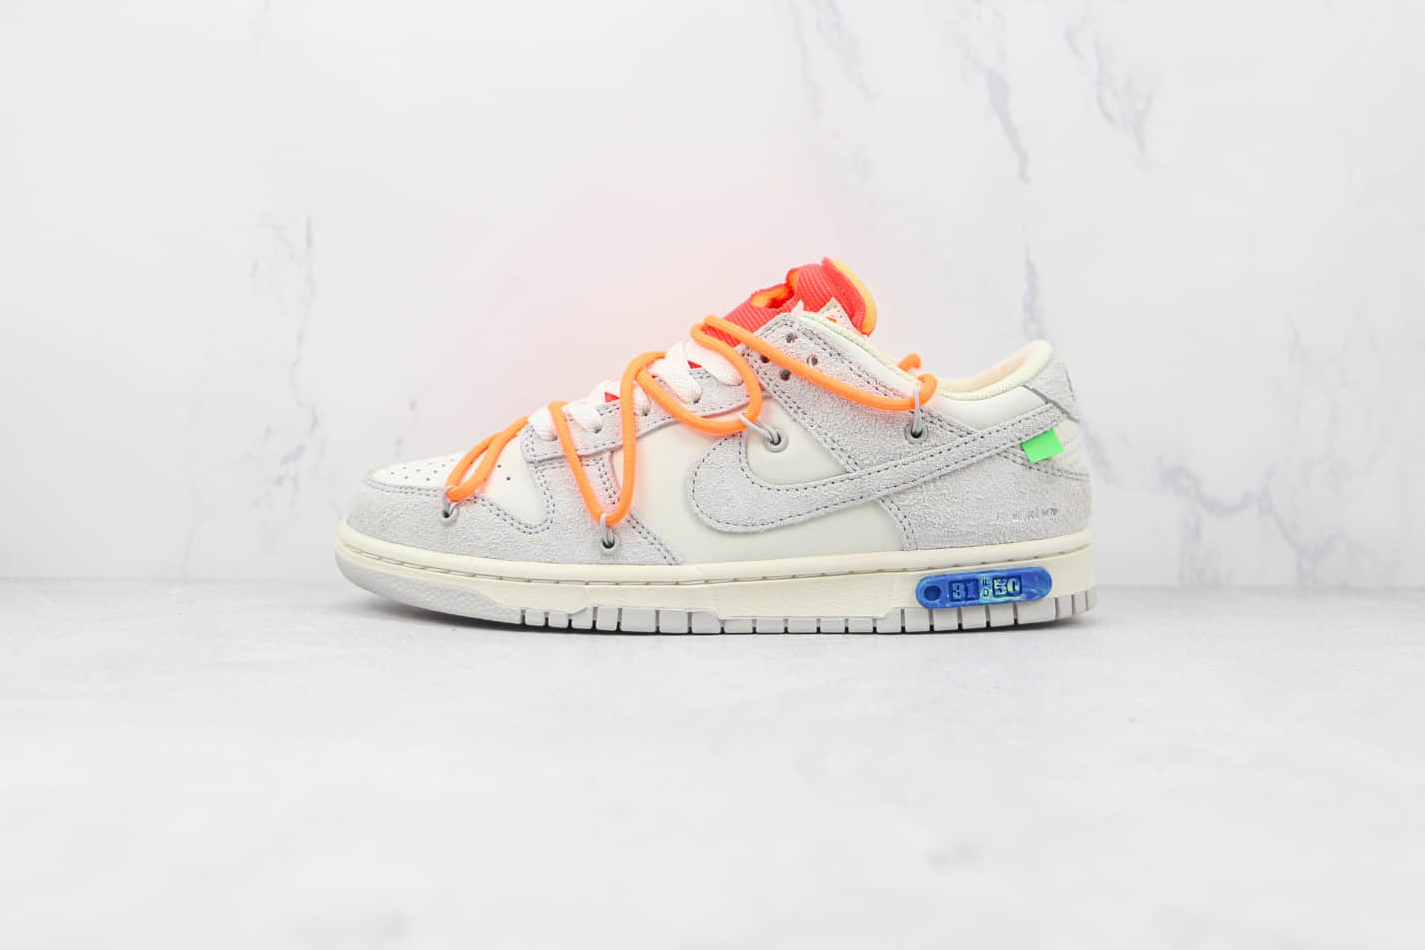 Nike Off-White x Dunk Low 'Lot 31 of 50' DJ0950-116 - Limited Edition Sneakers